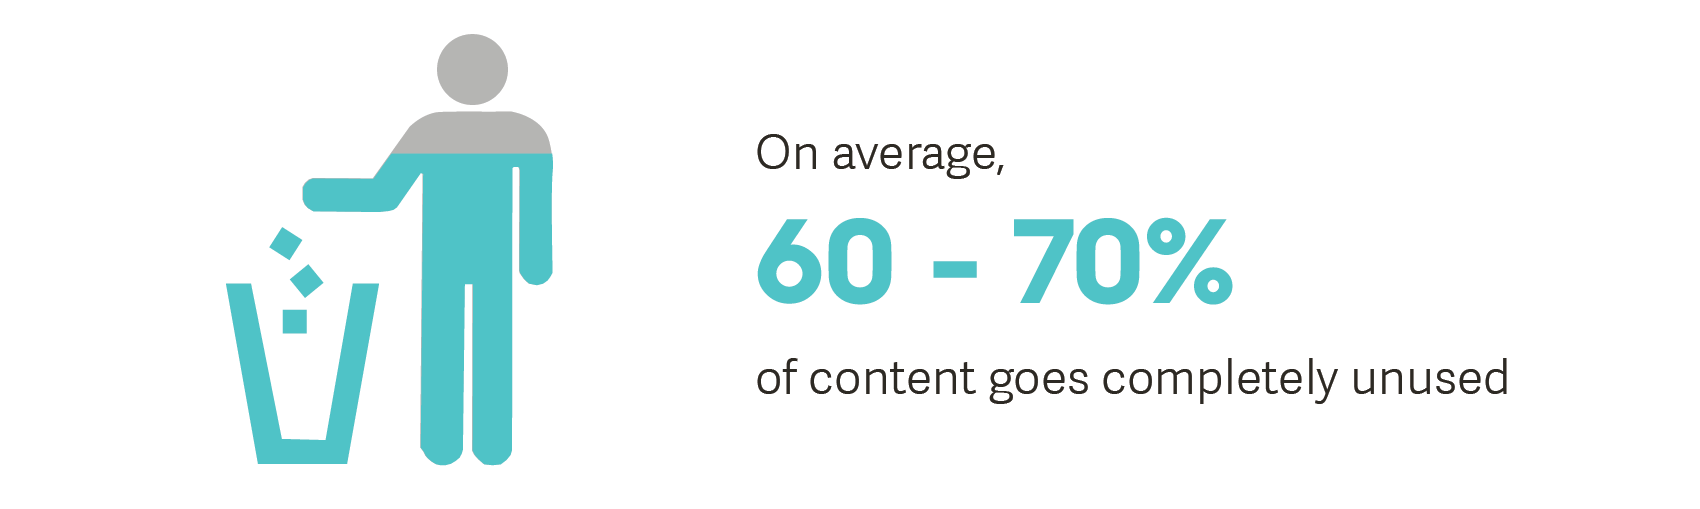 60 - 70% of content is wasted